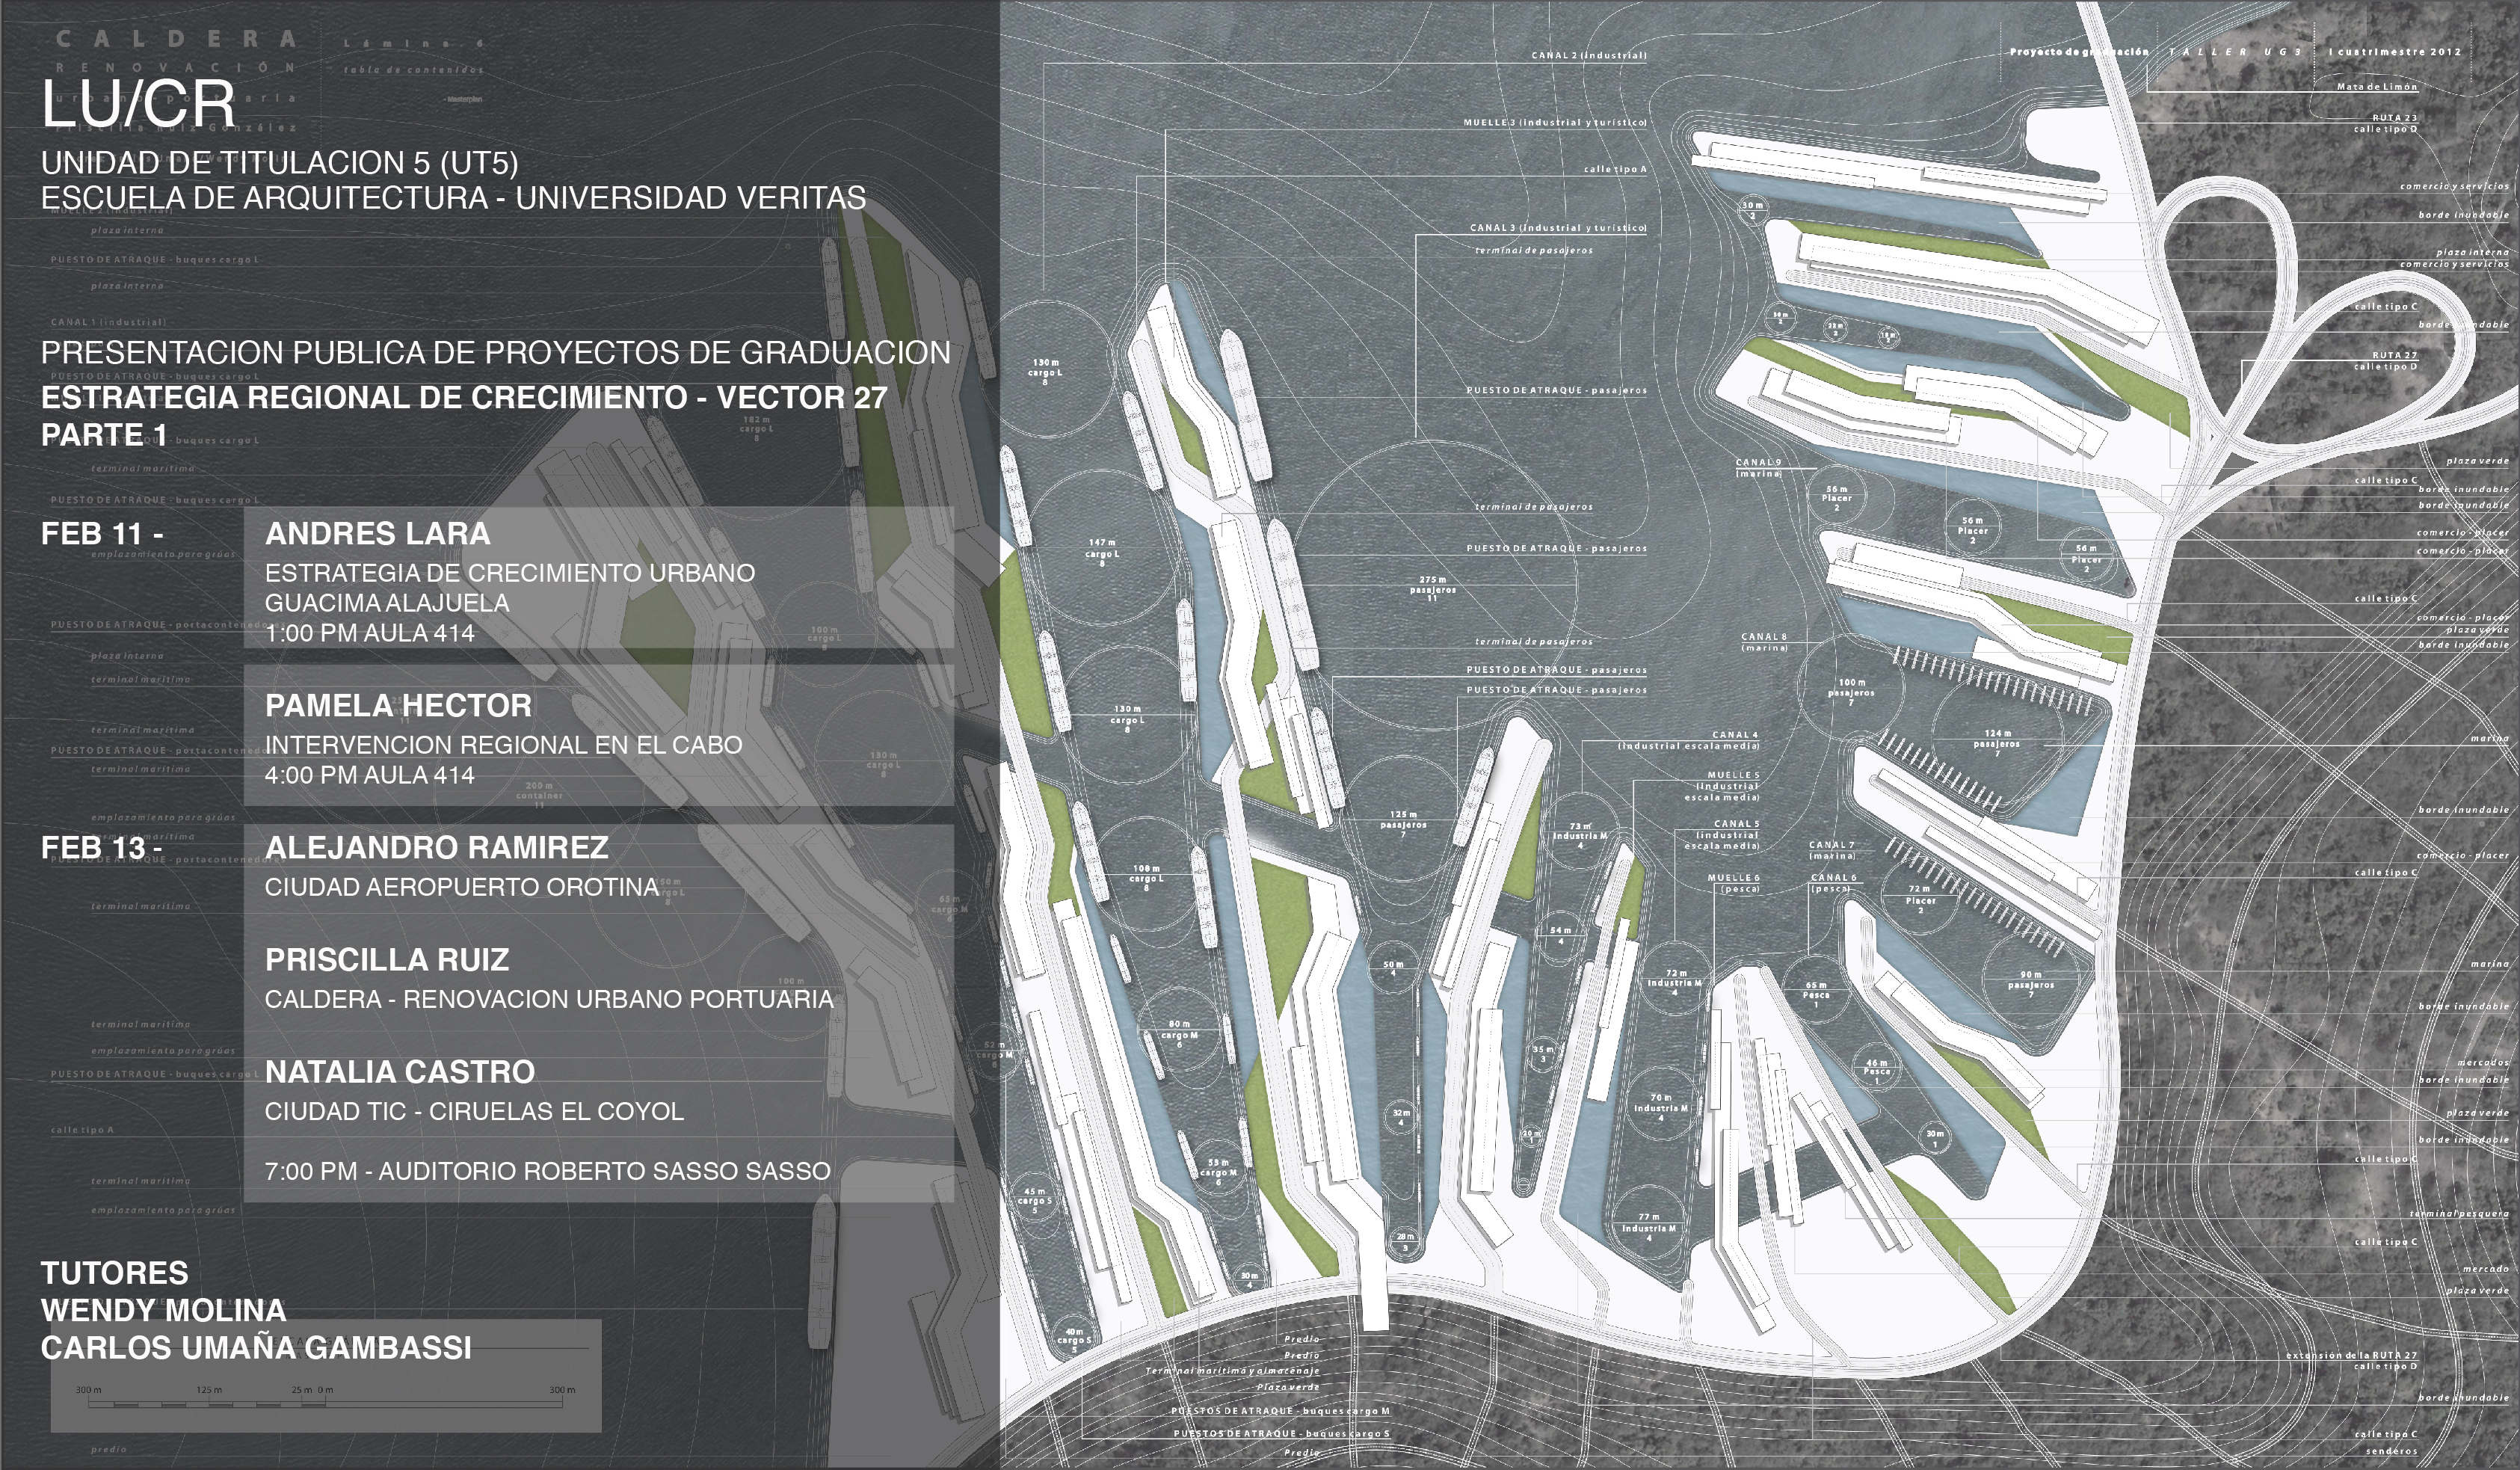 Architecture thesis projects presentation